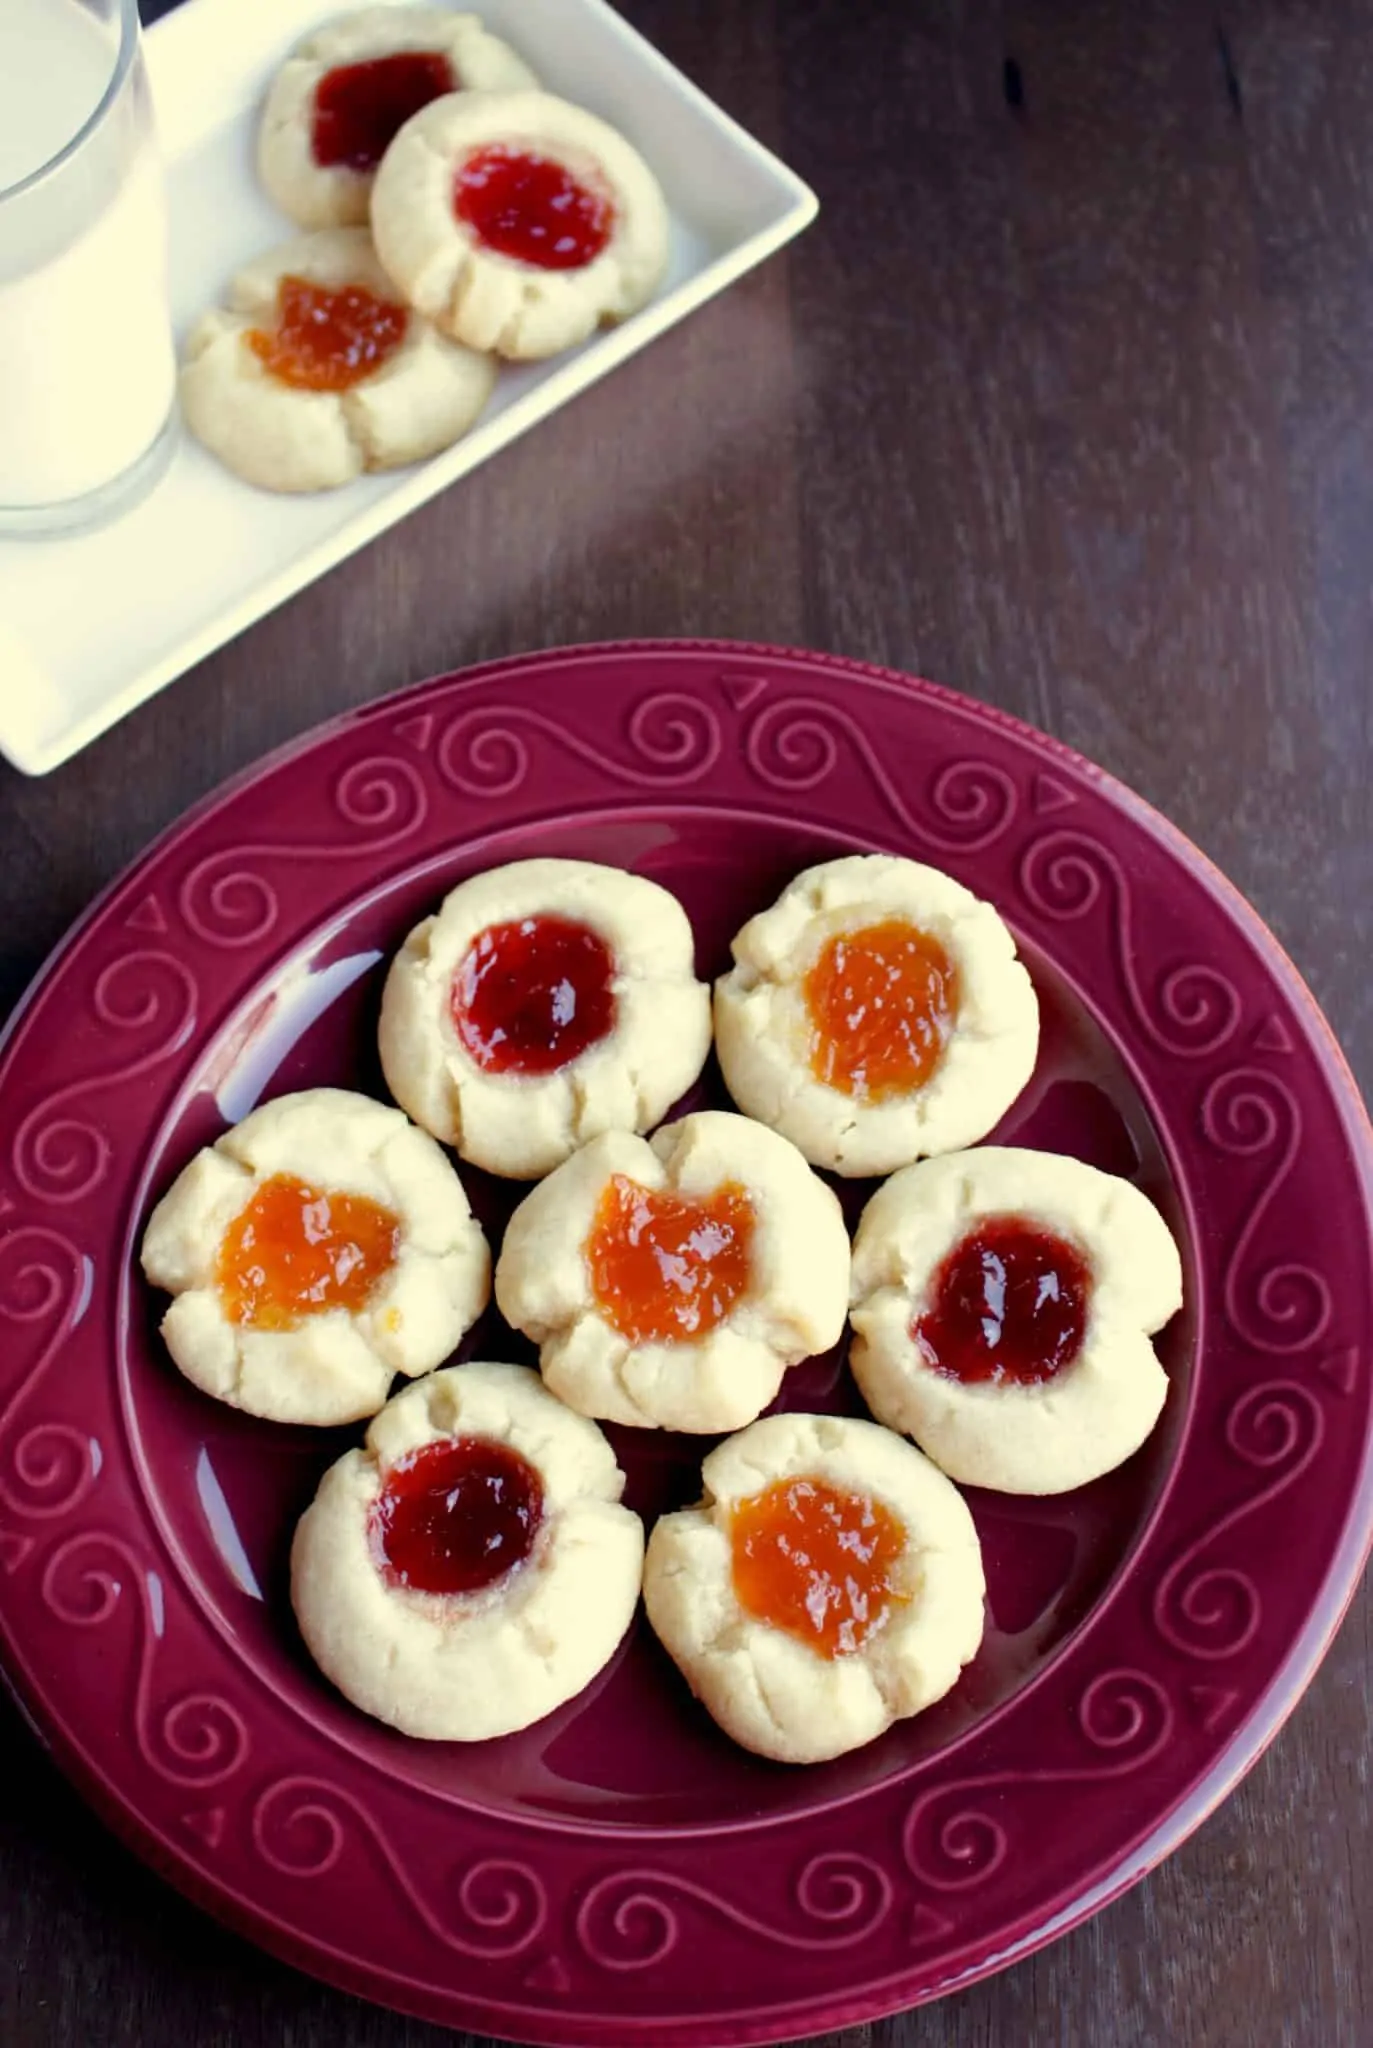 Jam Thumbprint Cookies in a red and white plates - Top view